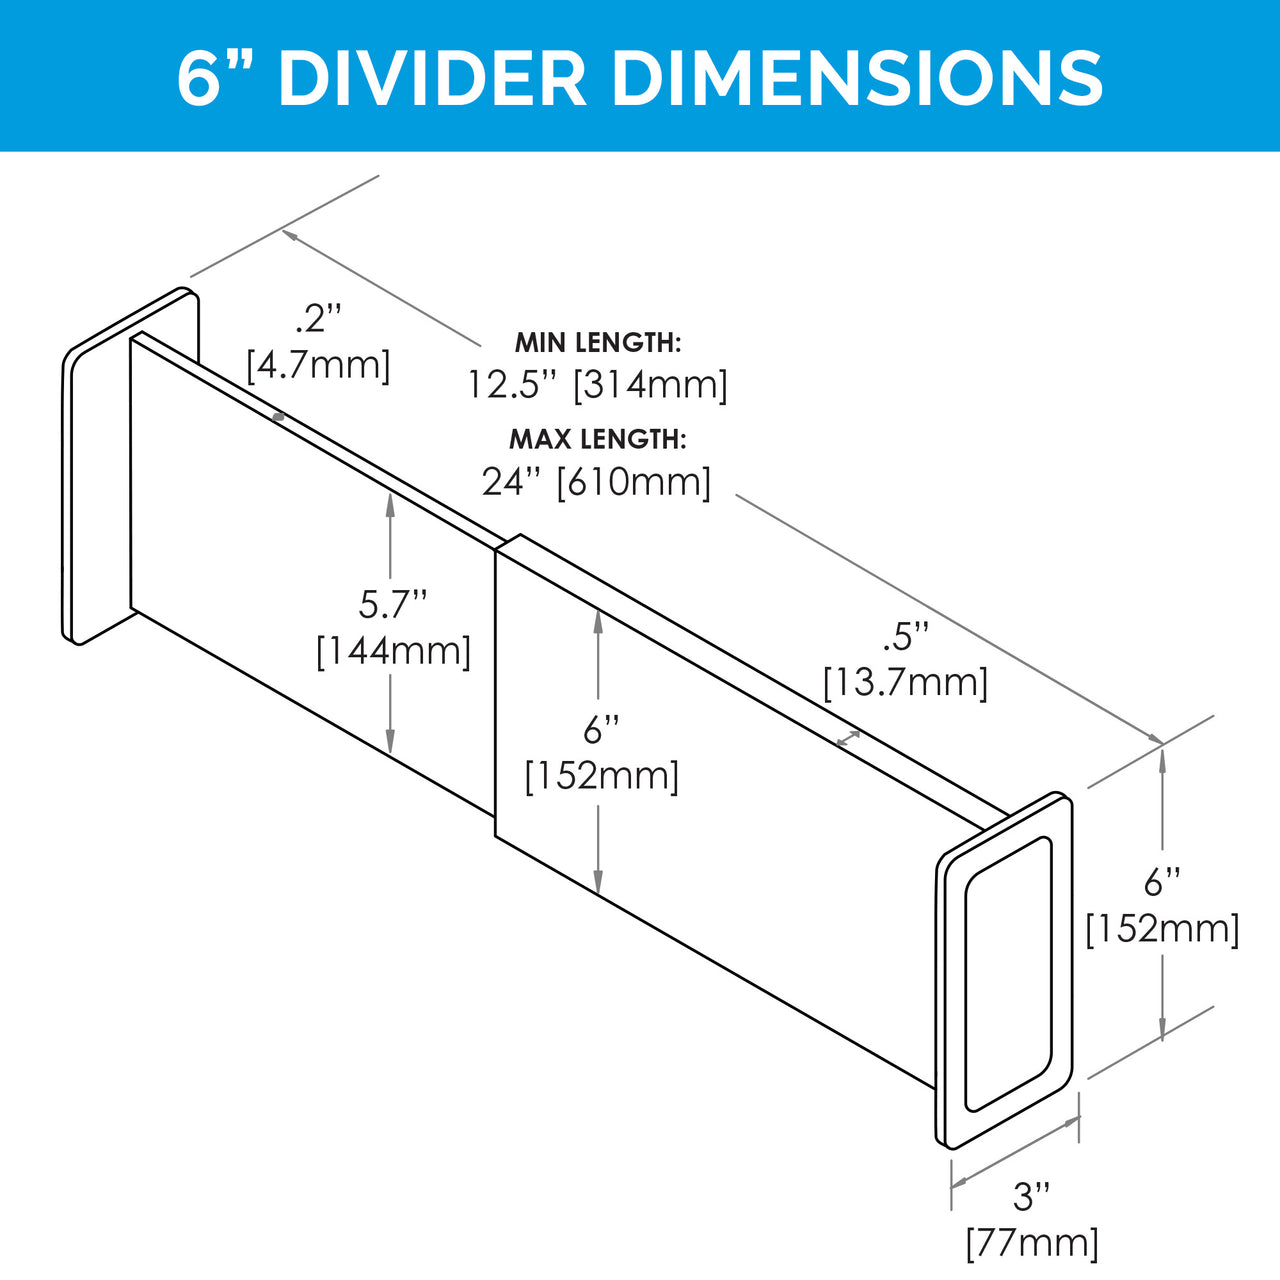 6" acrylic drawer divider dimensions